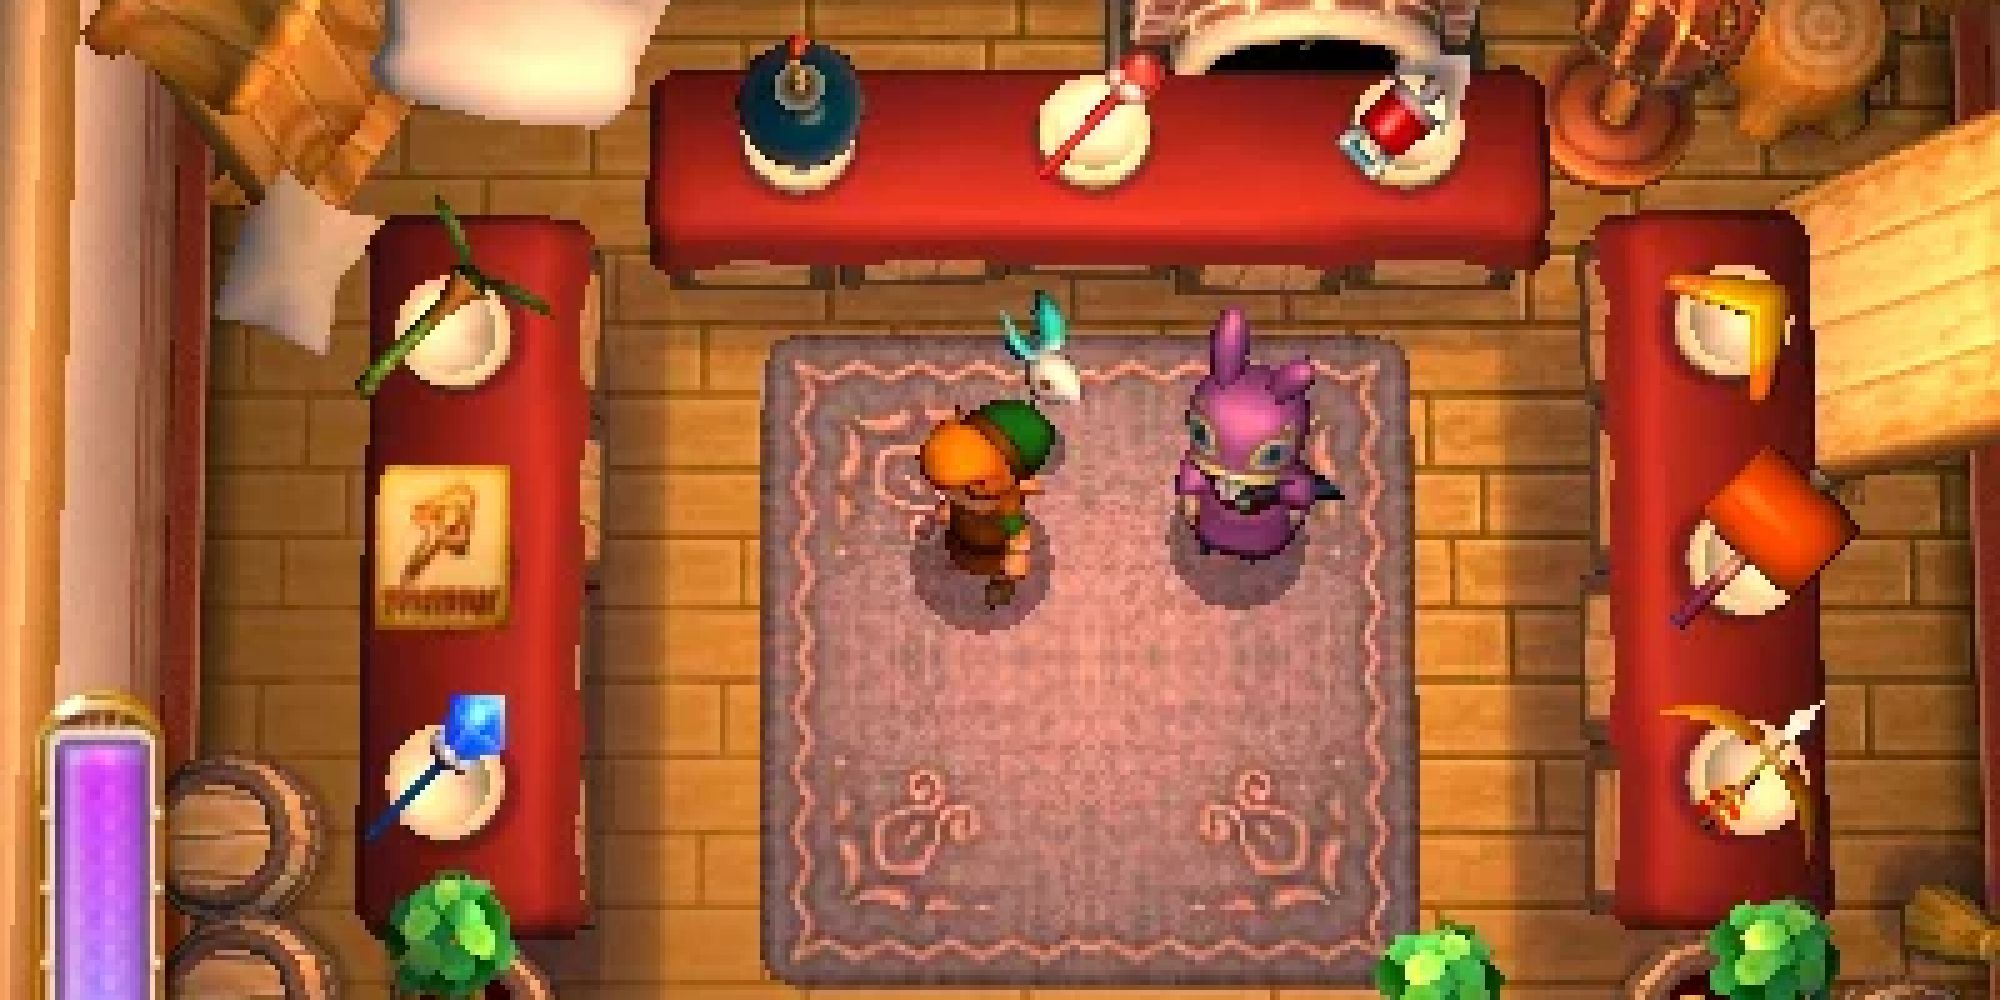 Link standing in the center of Ravio's item rental shop in A Link Between Worlds